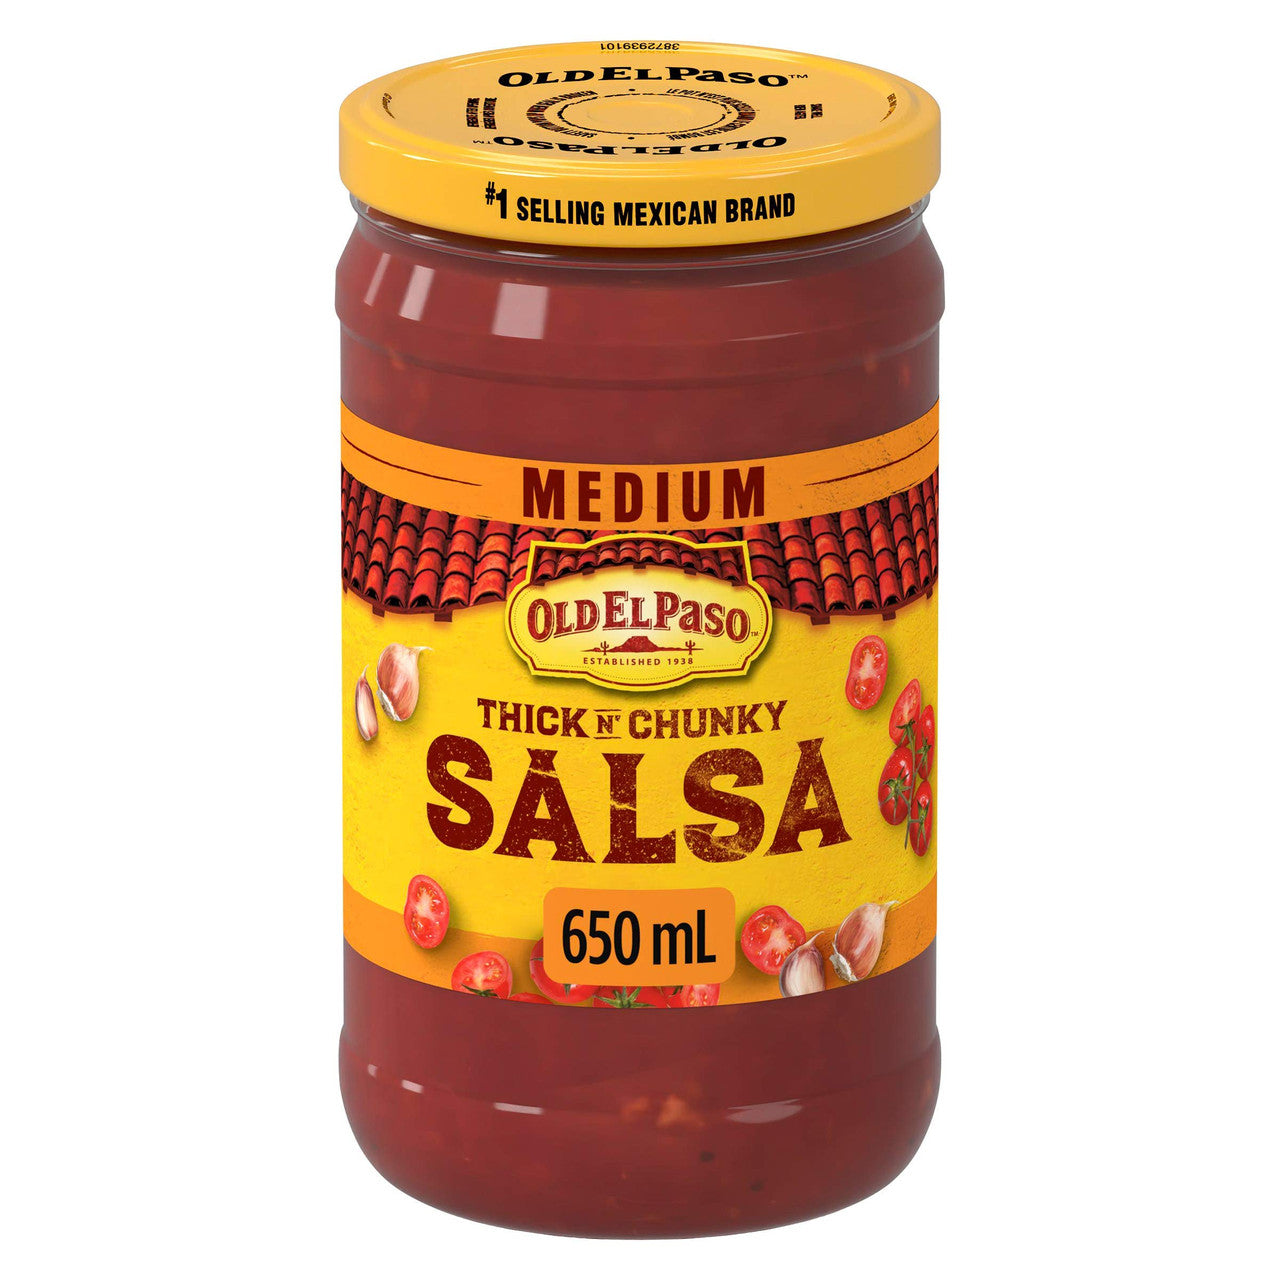 Old El Paso Thick 'n Chunky Medium Salsa, 650ml/22 oz., {Imported from Canada}